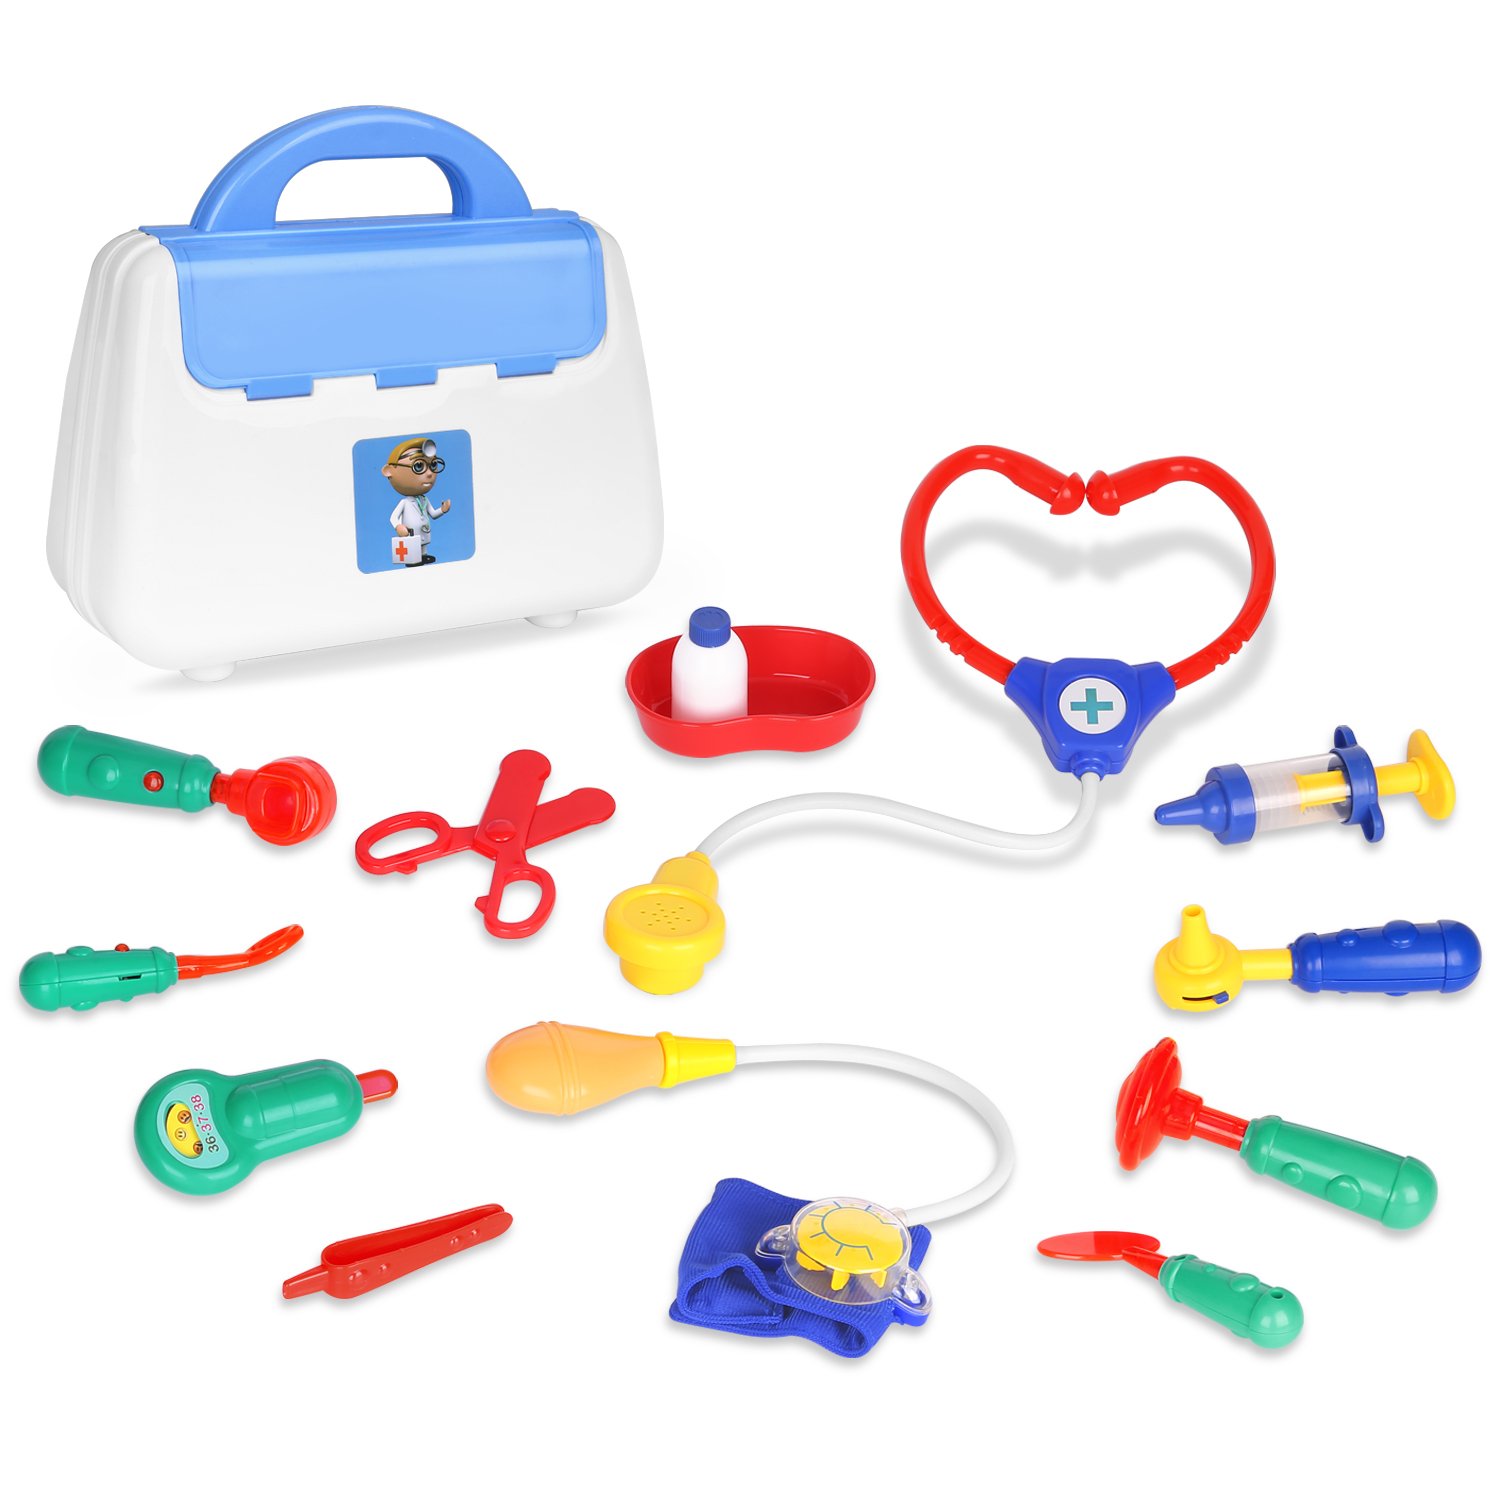 Top 9 Best Toy Doctor Kits Reviews in 2022 4